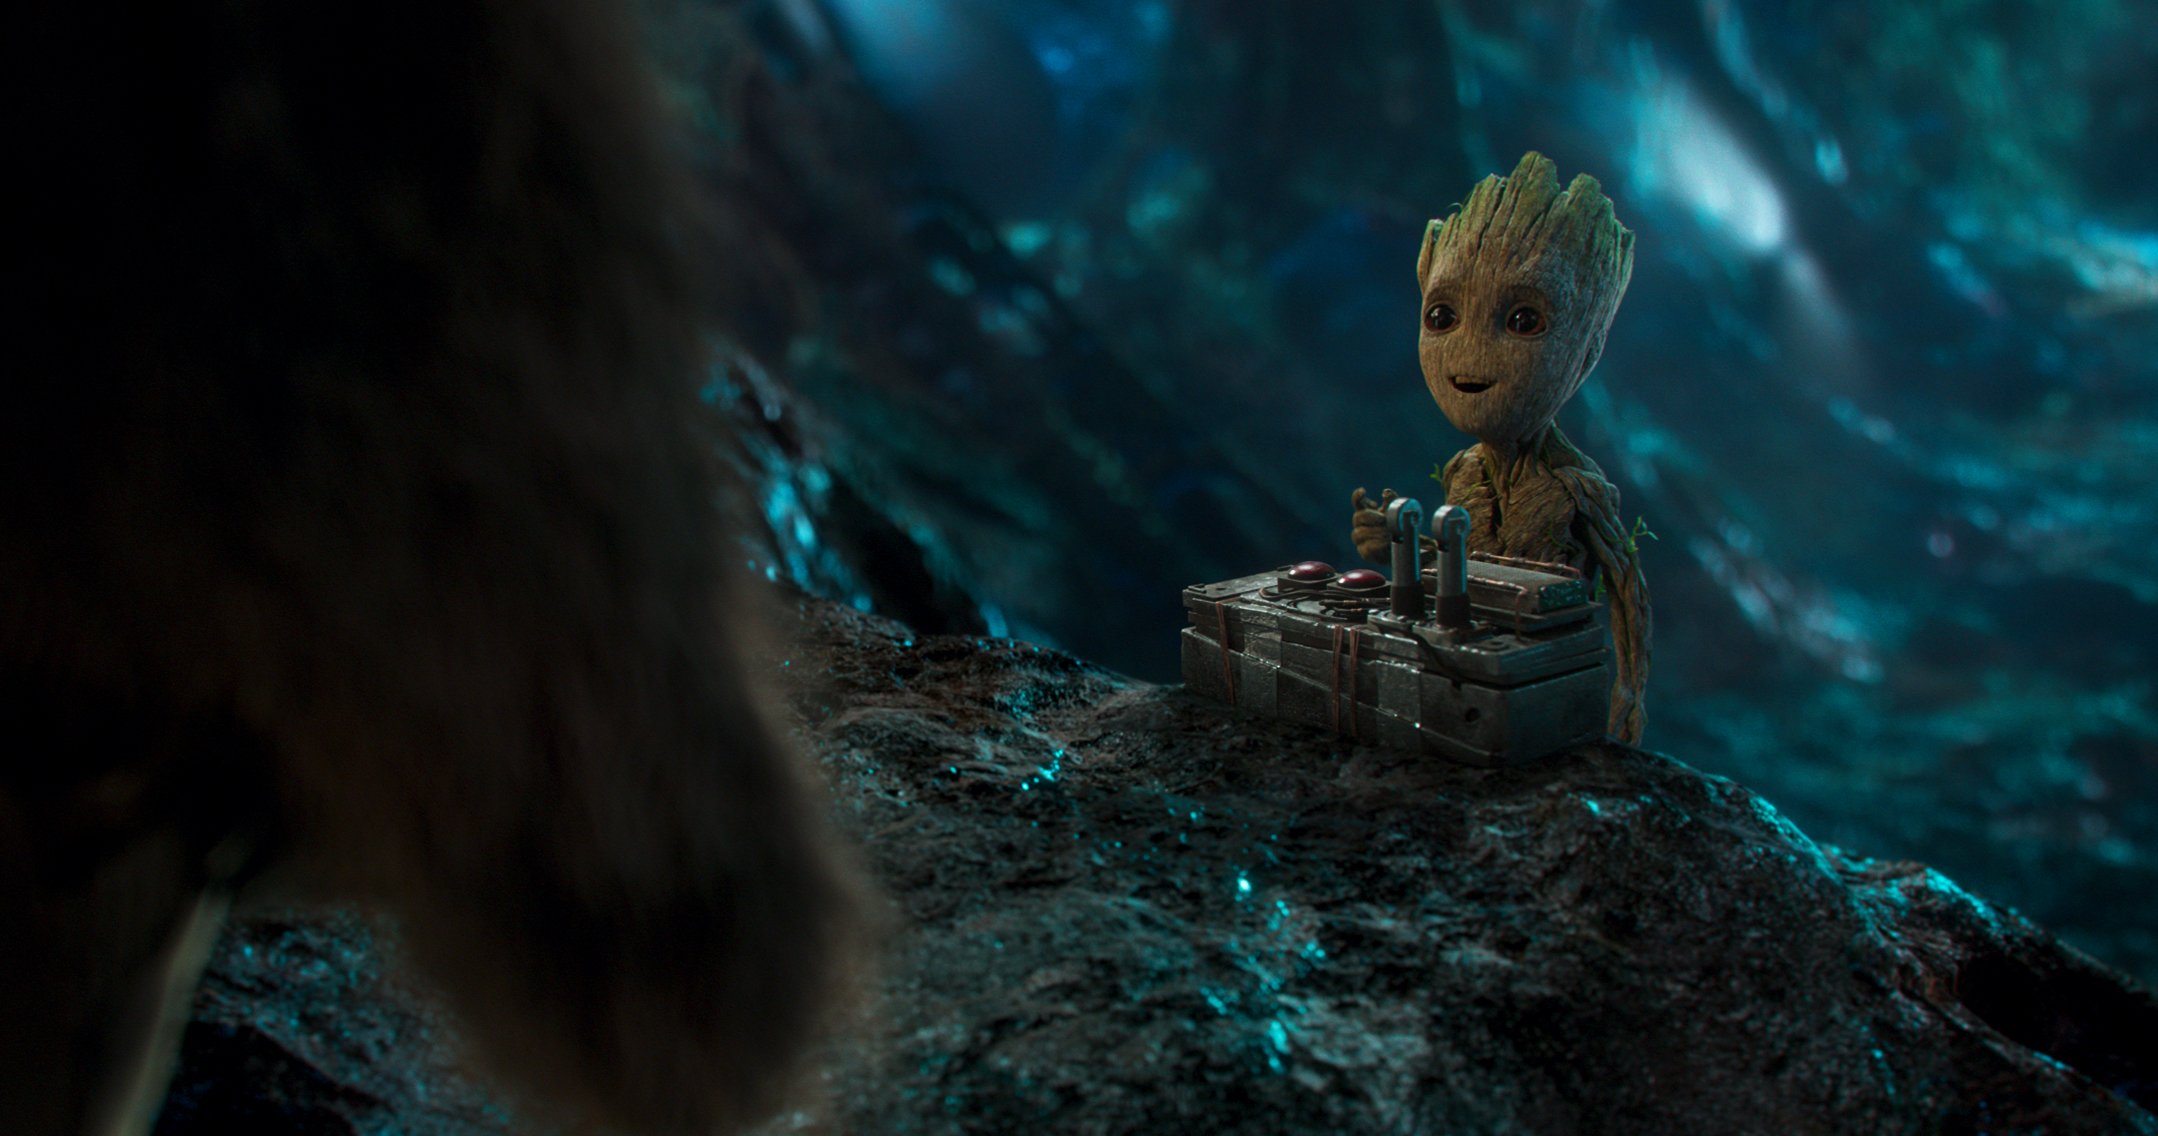 Wallpaper Baby Groot Guardians of the Galaxy